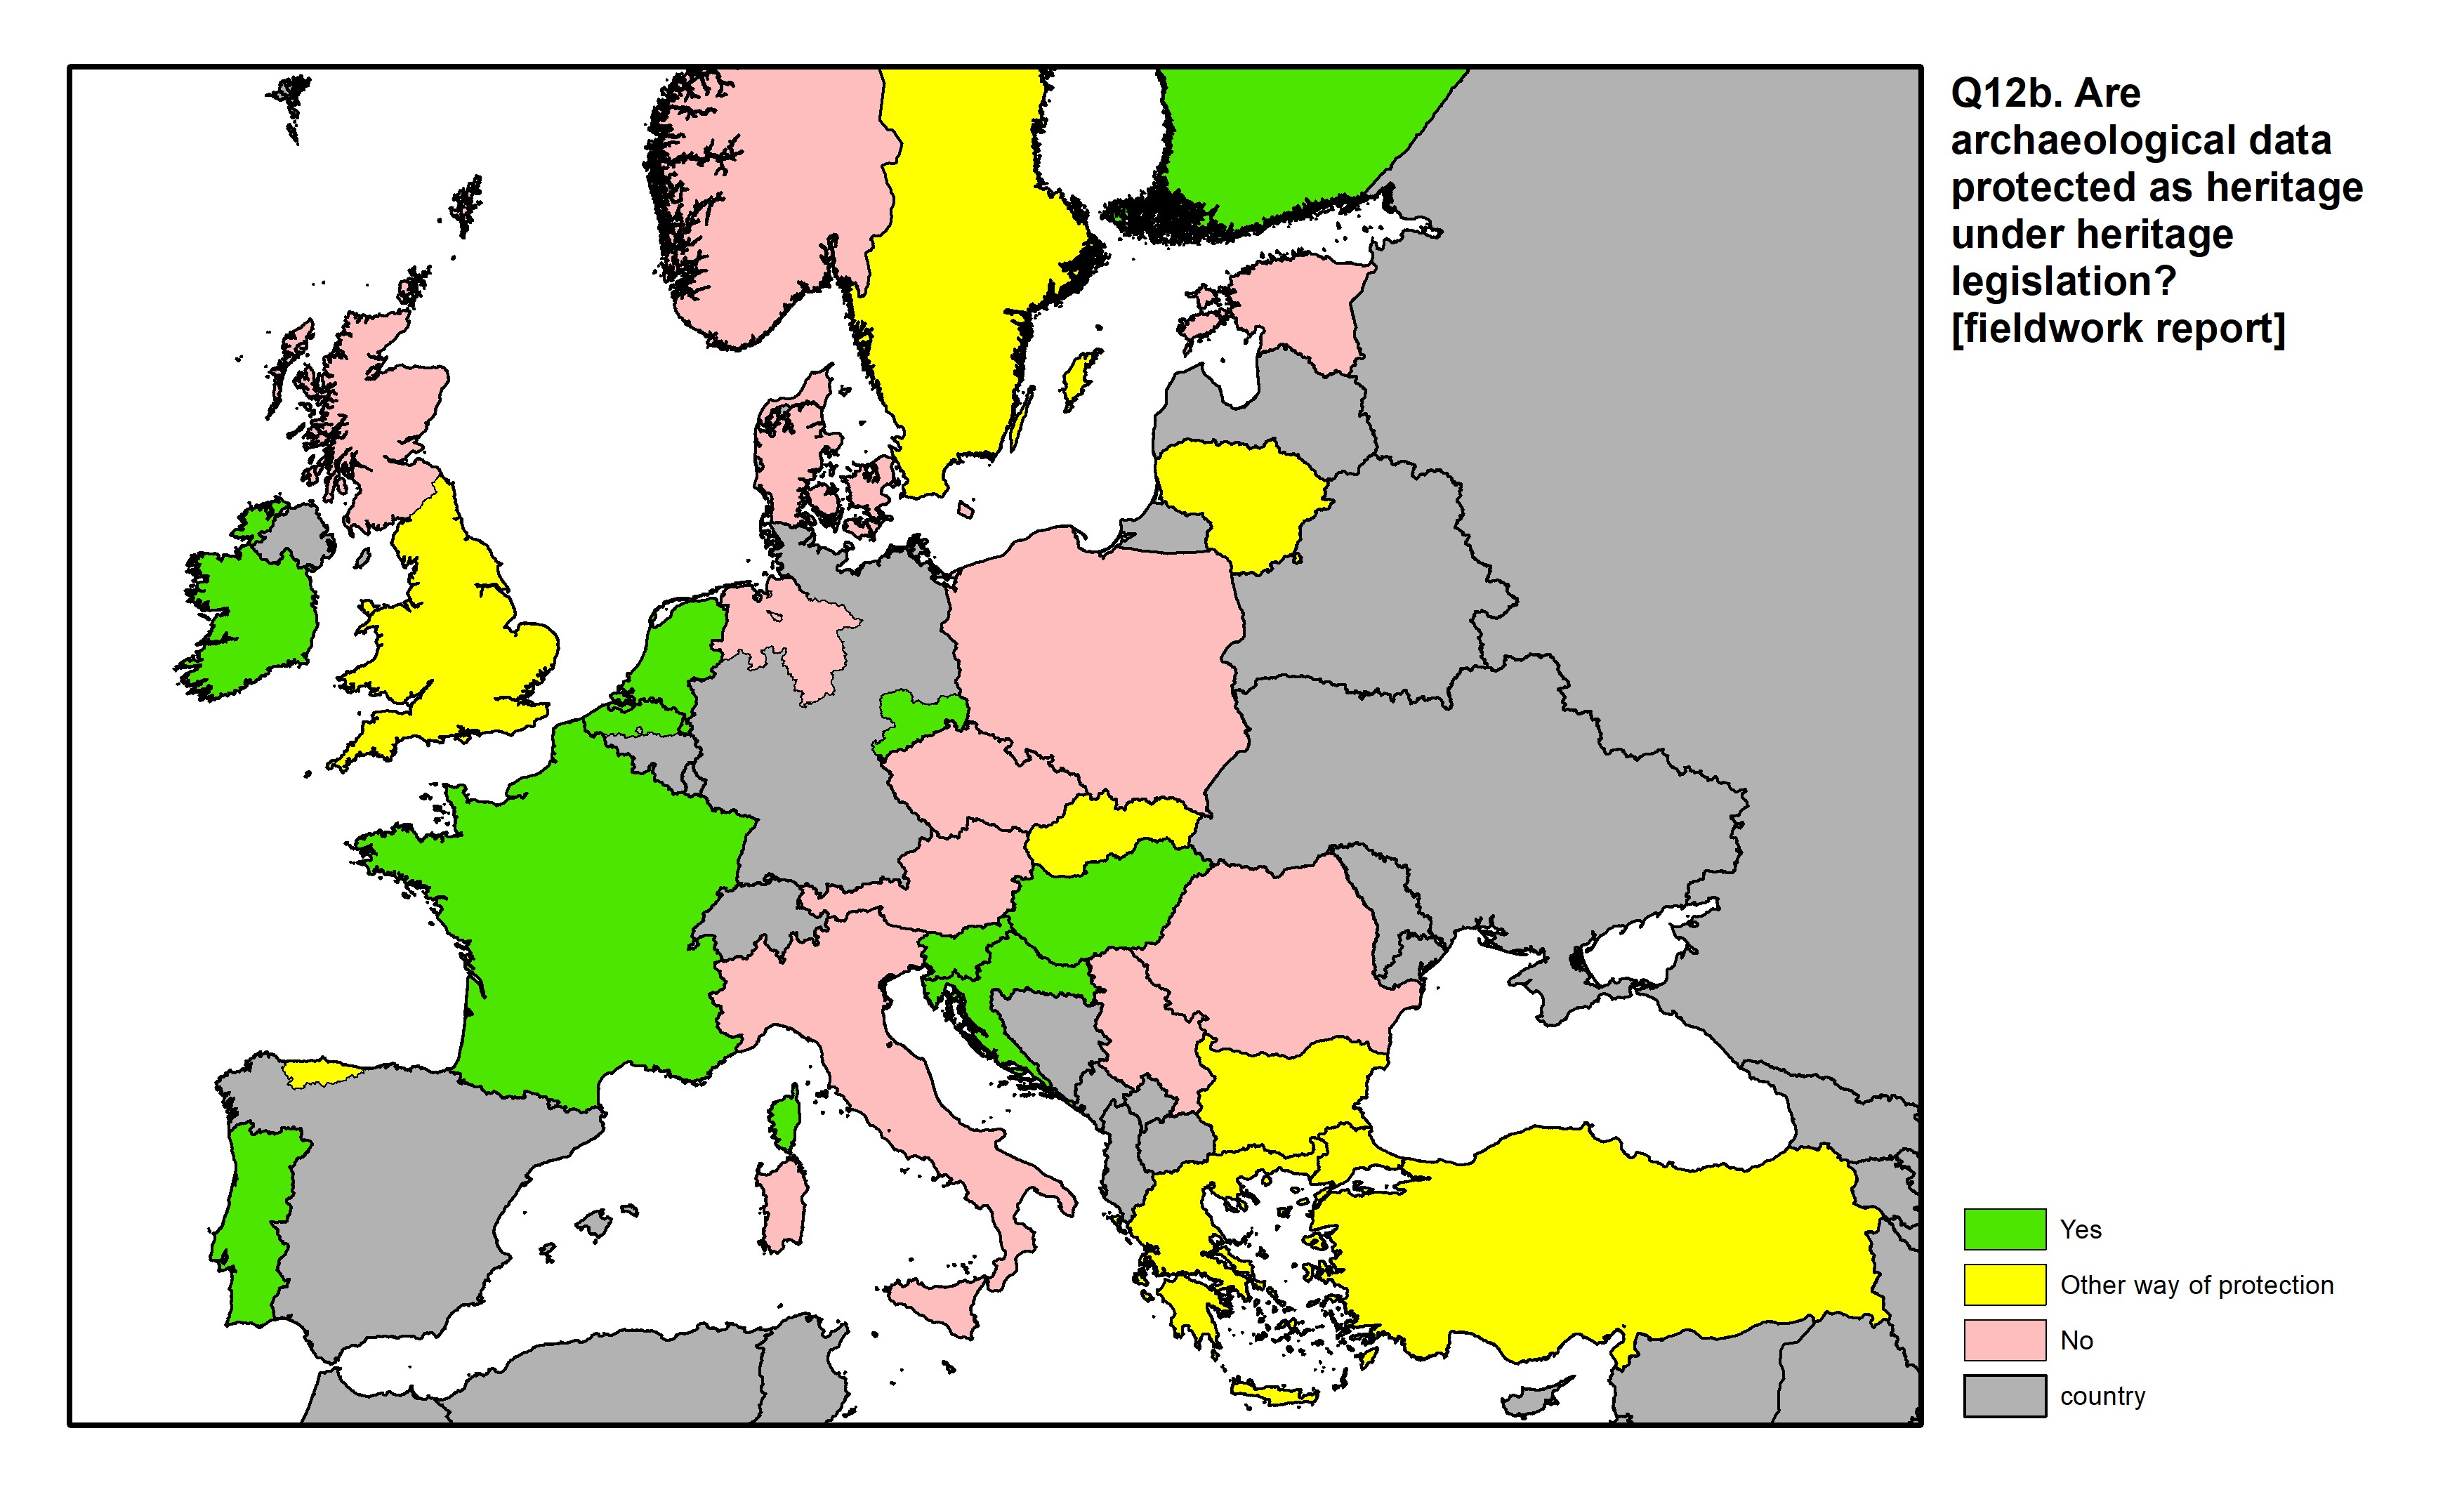 Figure 41: a map of Europe showing countries and regions in colour based on response rates to the survey question.